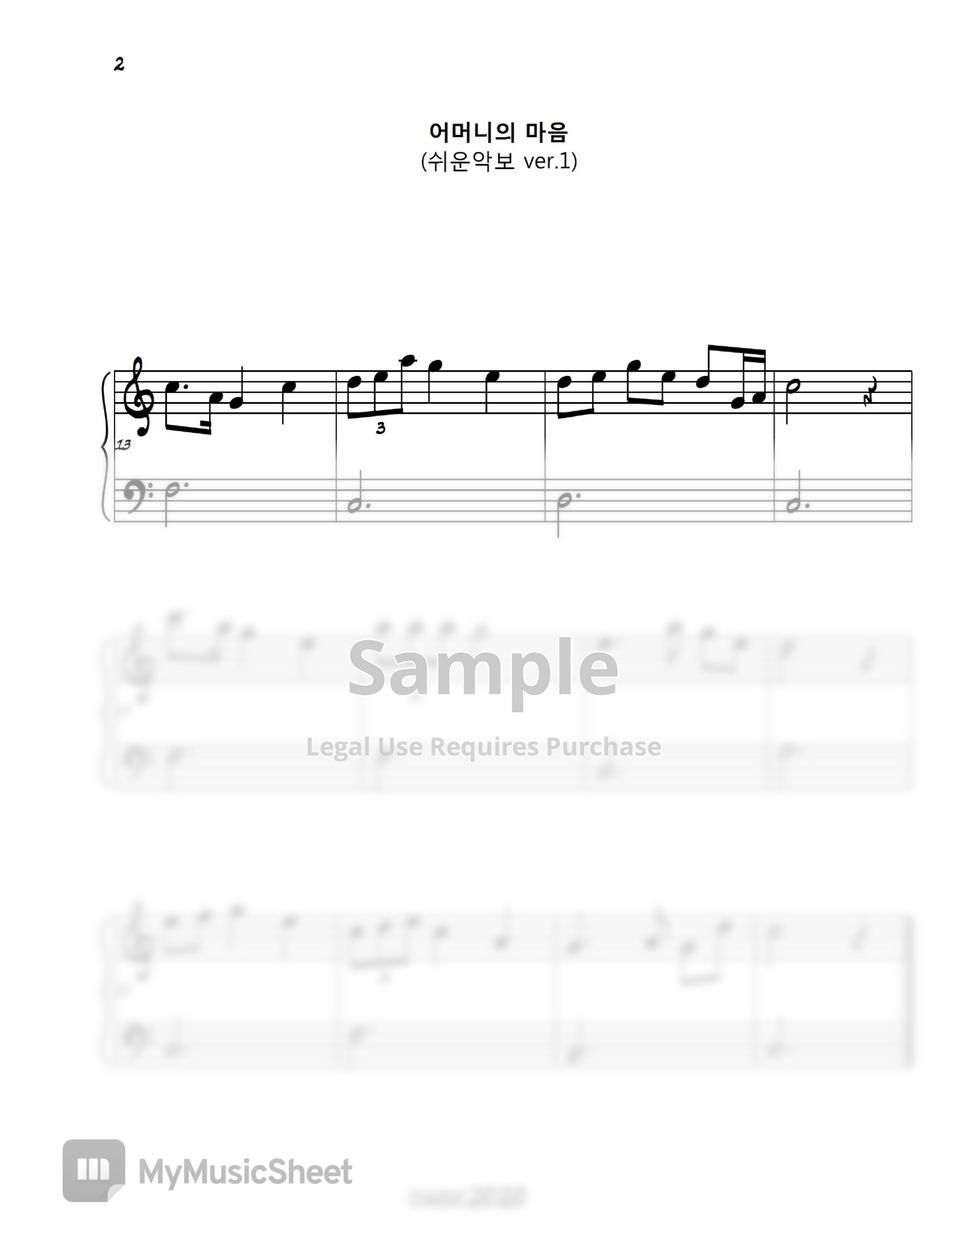 lee heung yeol - Mother's heart (easy piano) by classic2020